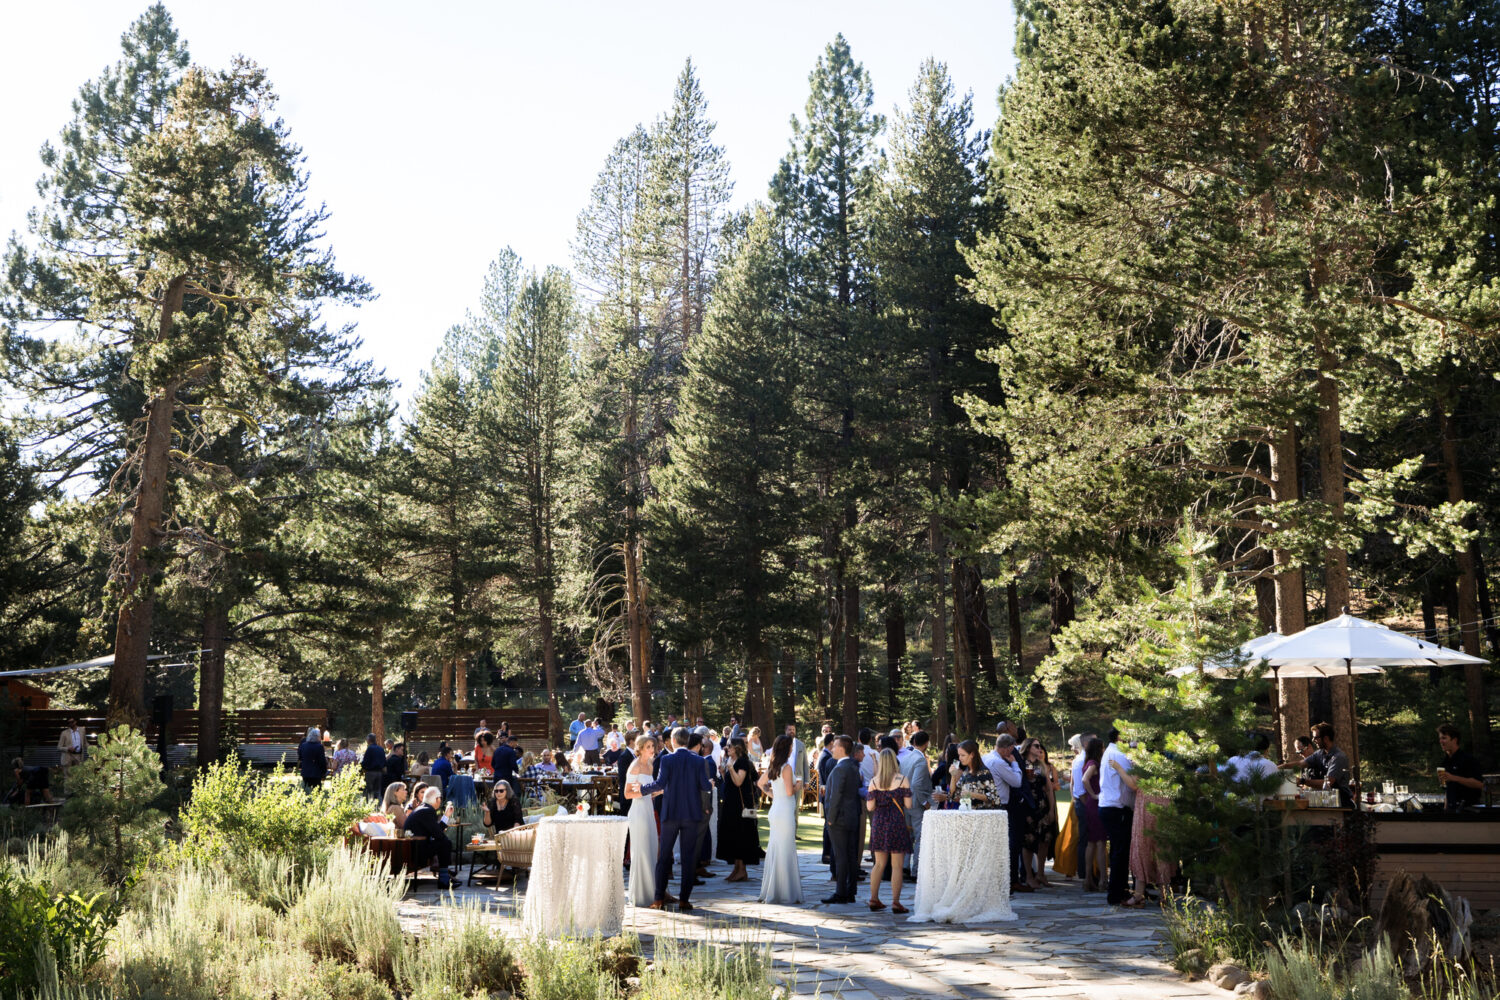 Towering pine trees surround the outdoor cocktail and reception areas.